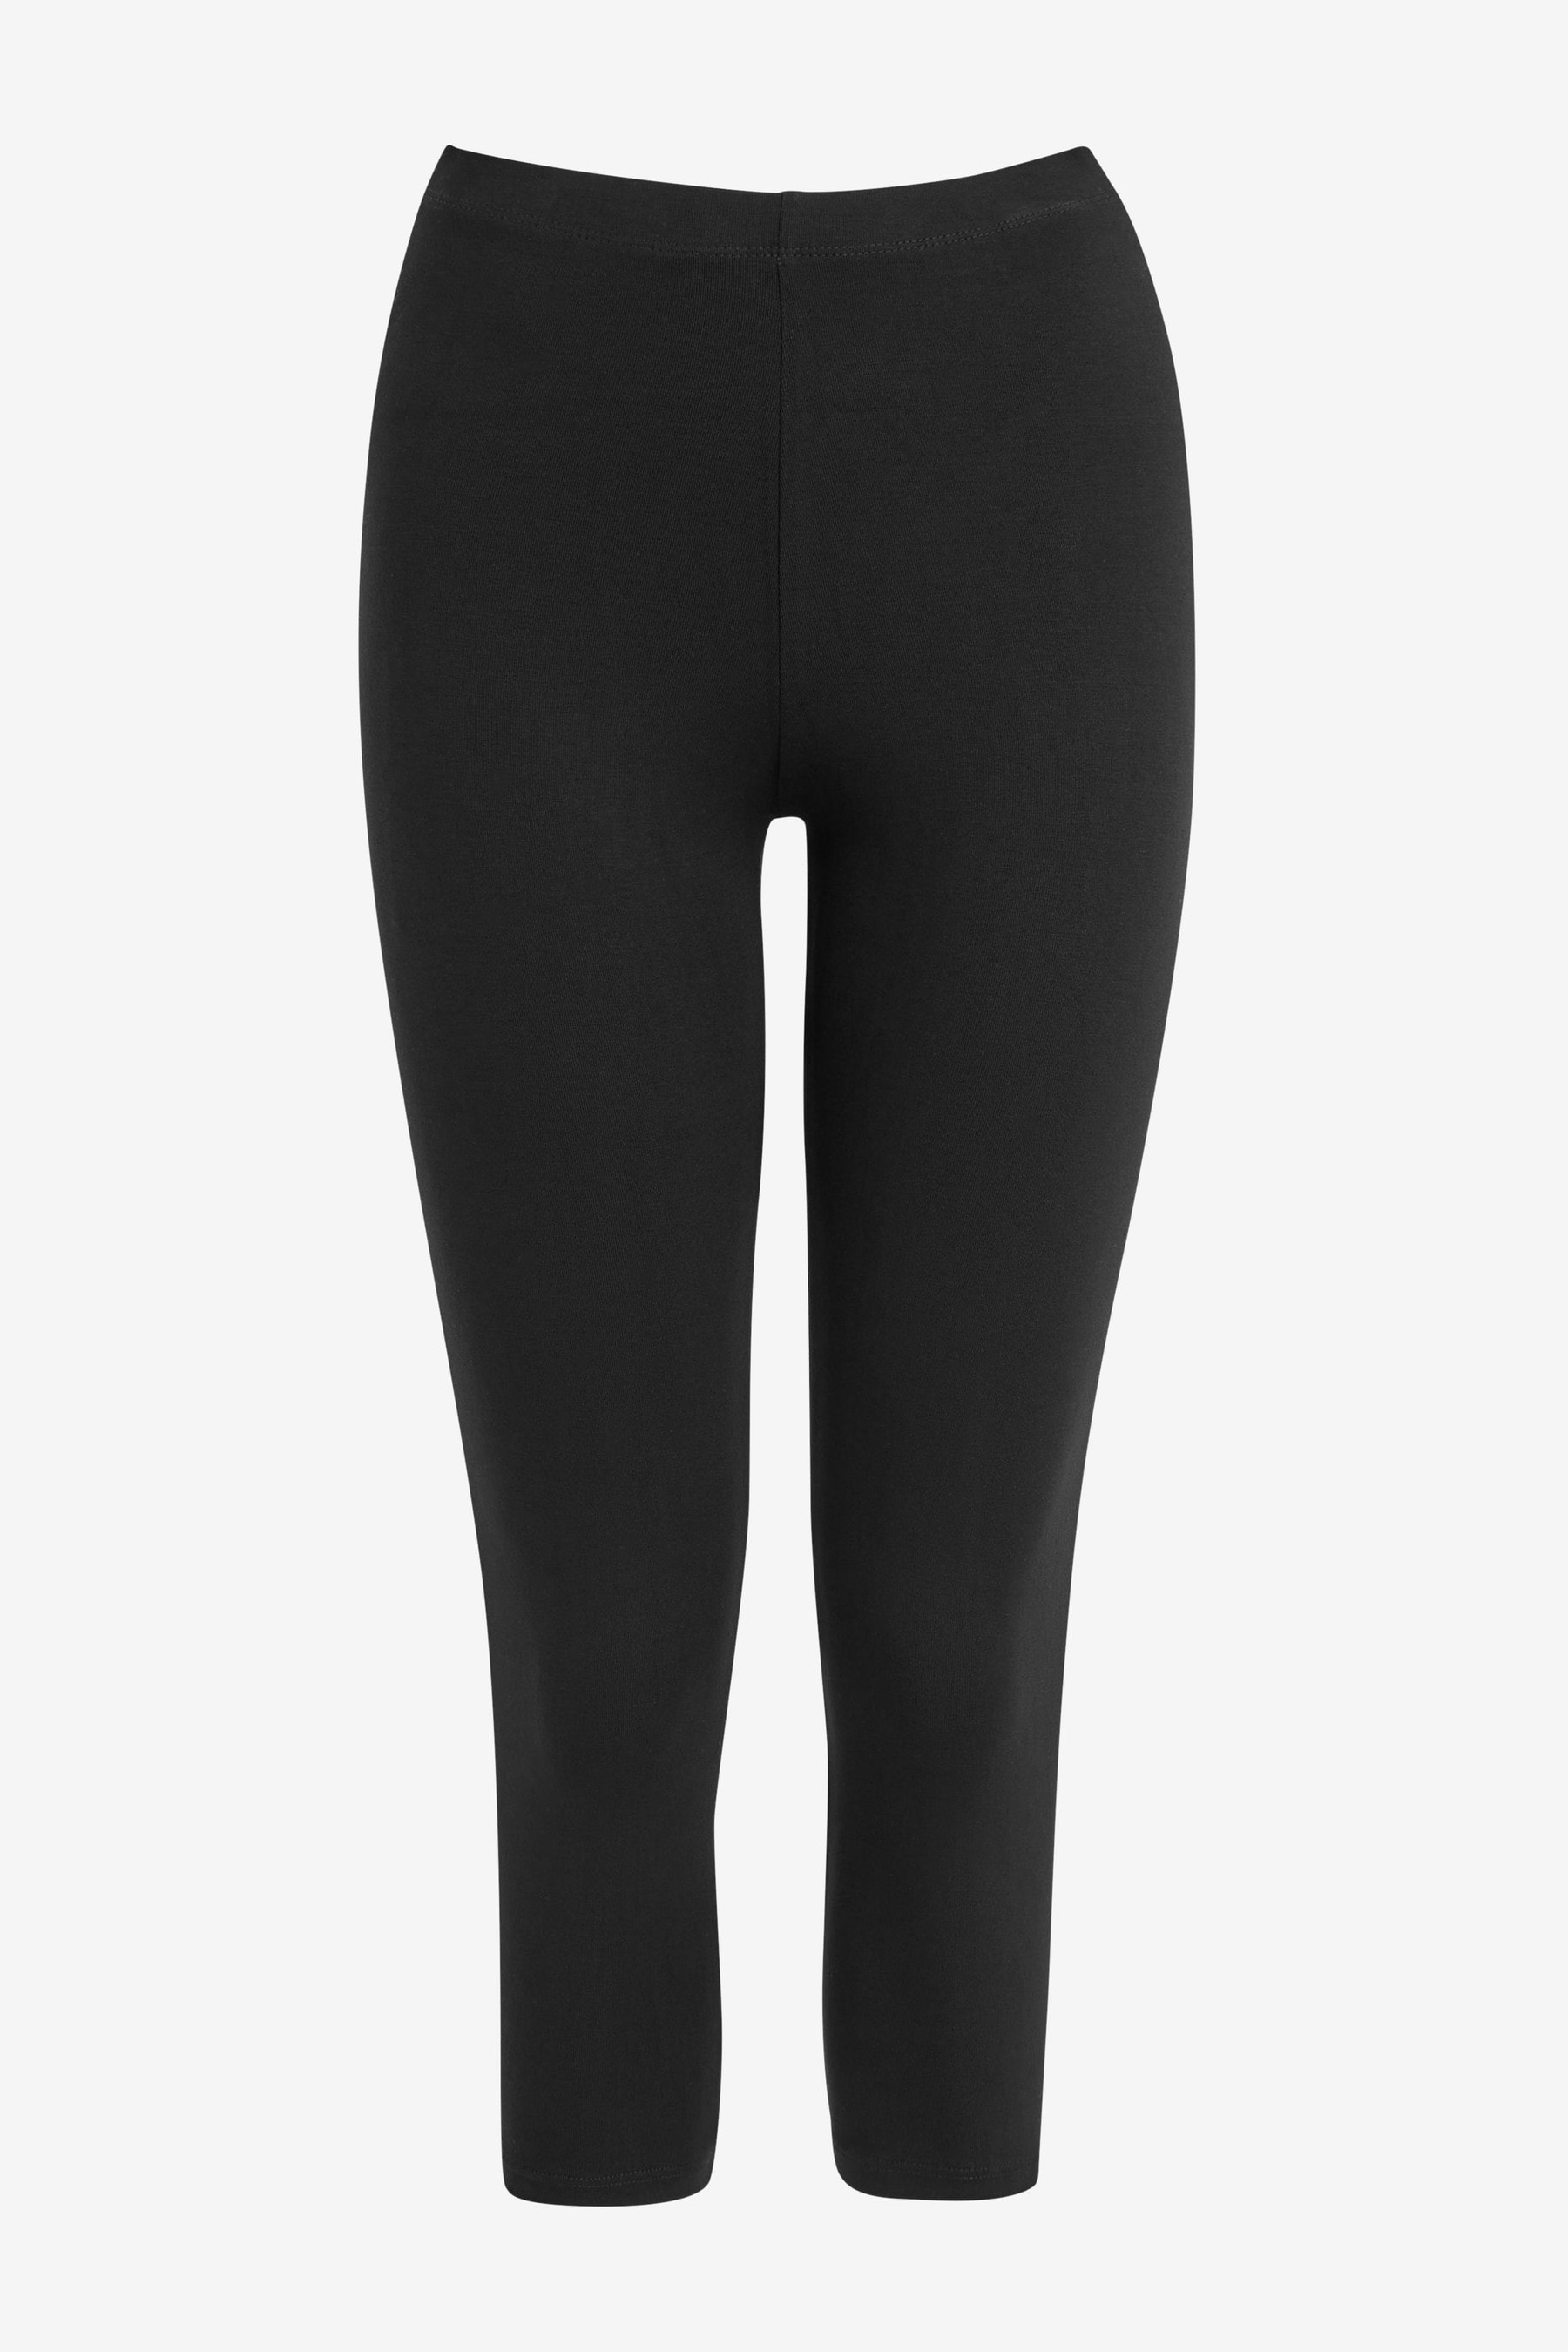 Buy Black Cropped Leggings from the Next UK online shop